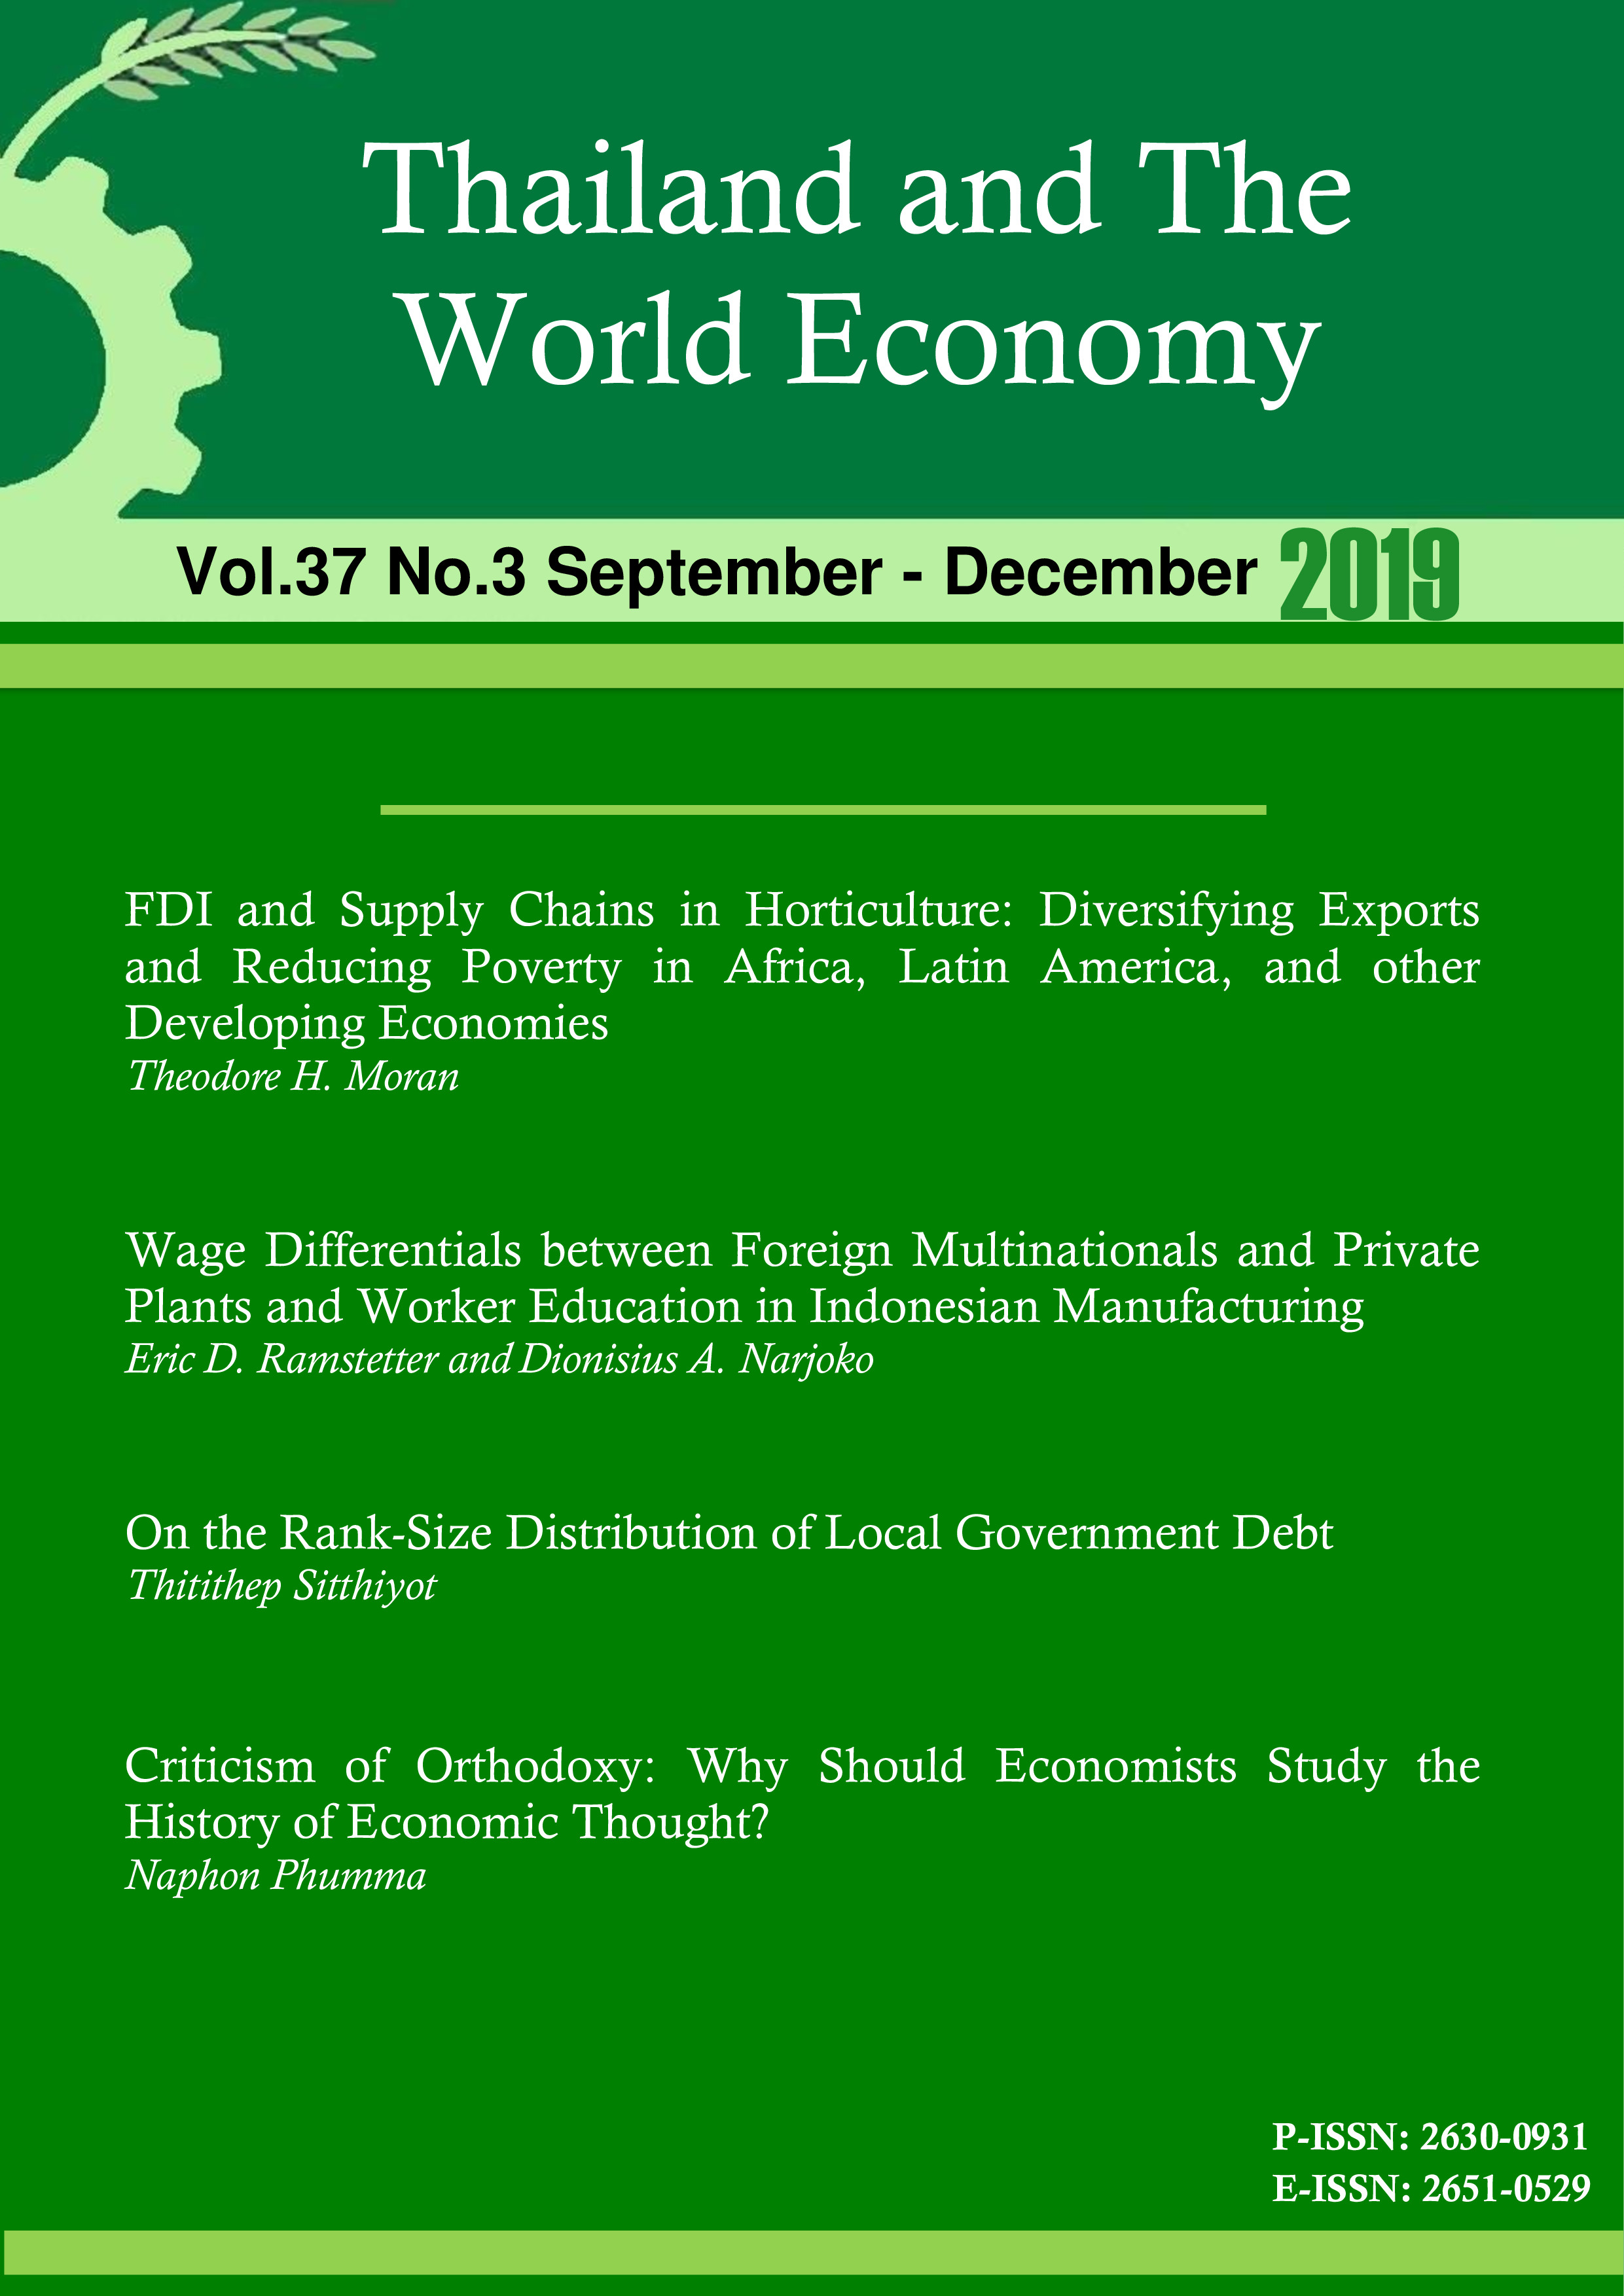 					View Vol. 37 No. 3 (2019): Thailand and The World Economy
				